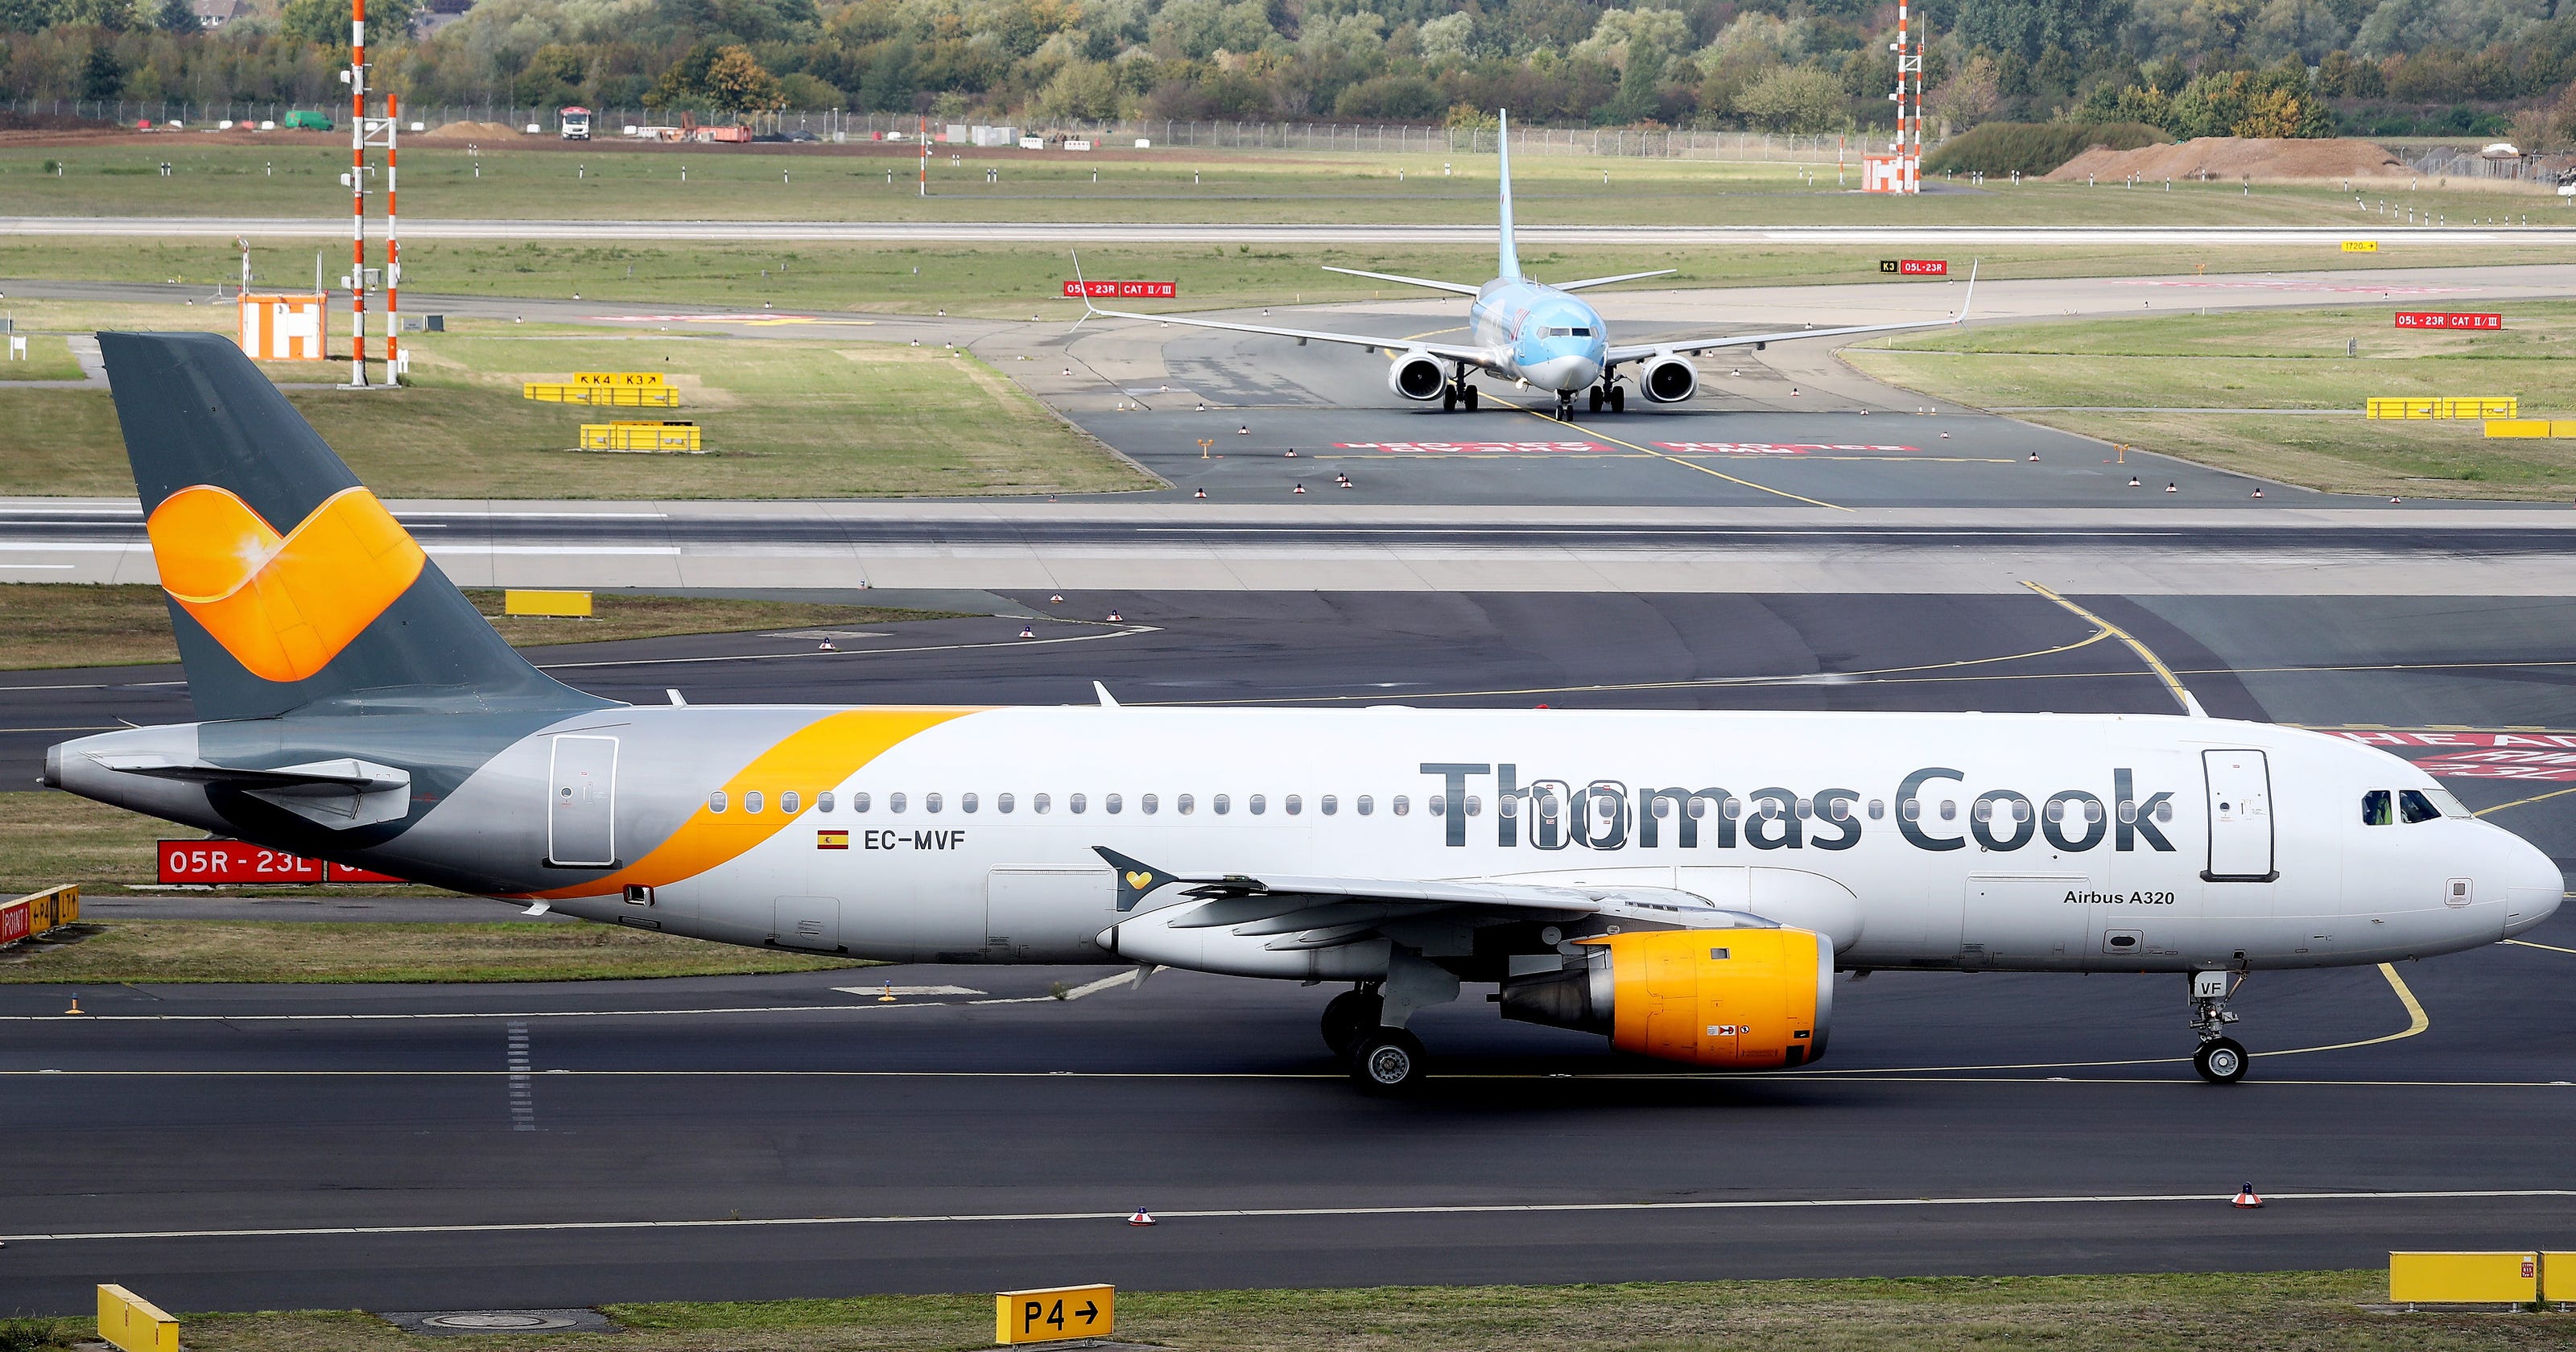 Days After Thomas Cook Collapse Help Coming For Passengers Workers In Limbo Travel And Tourism